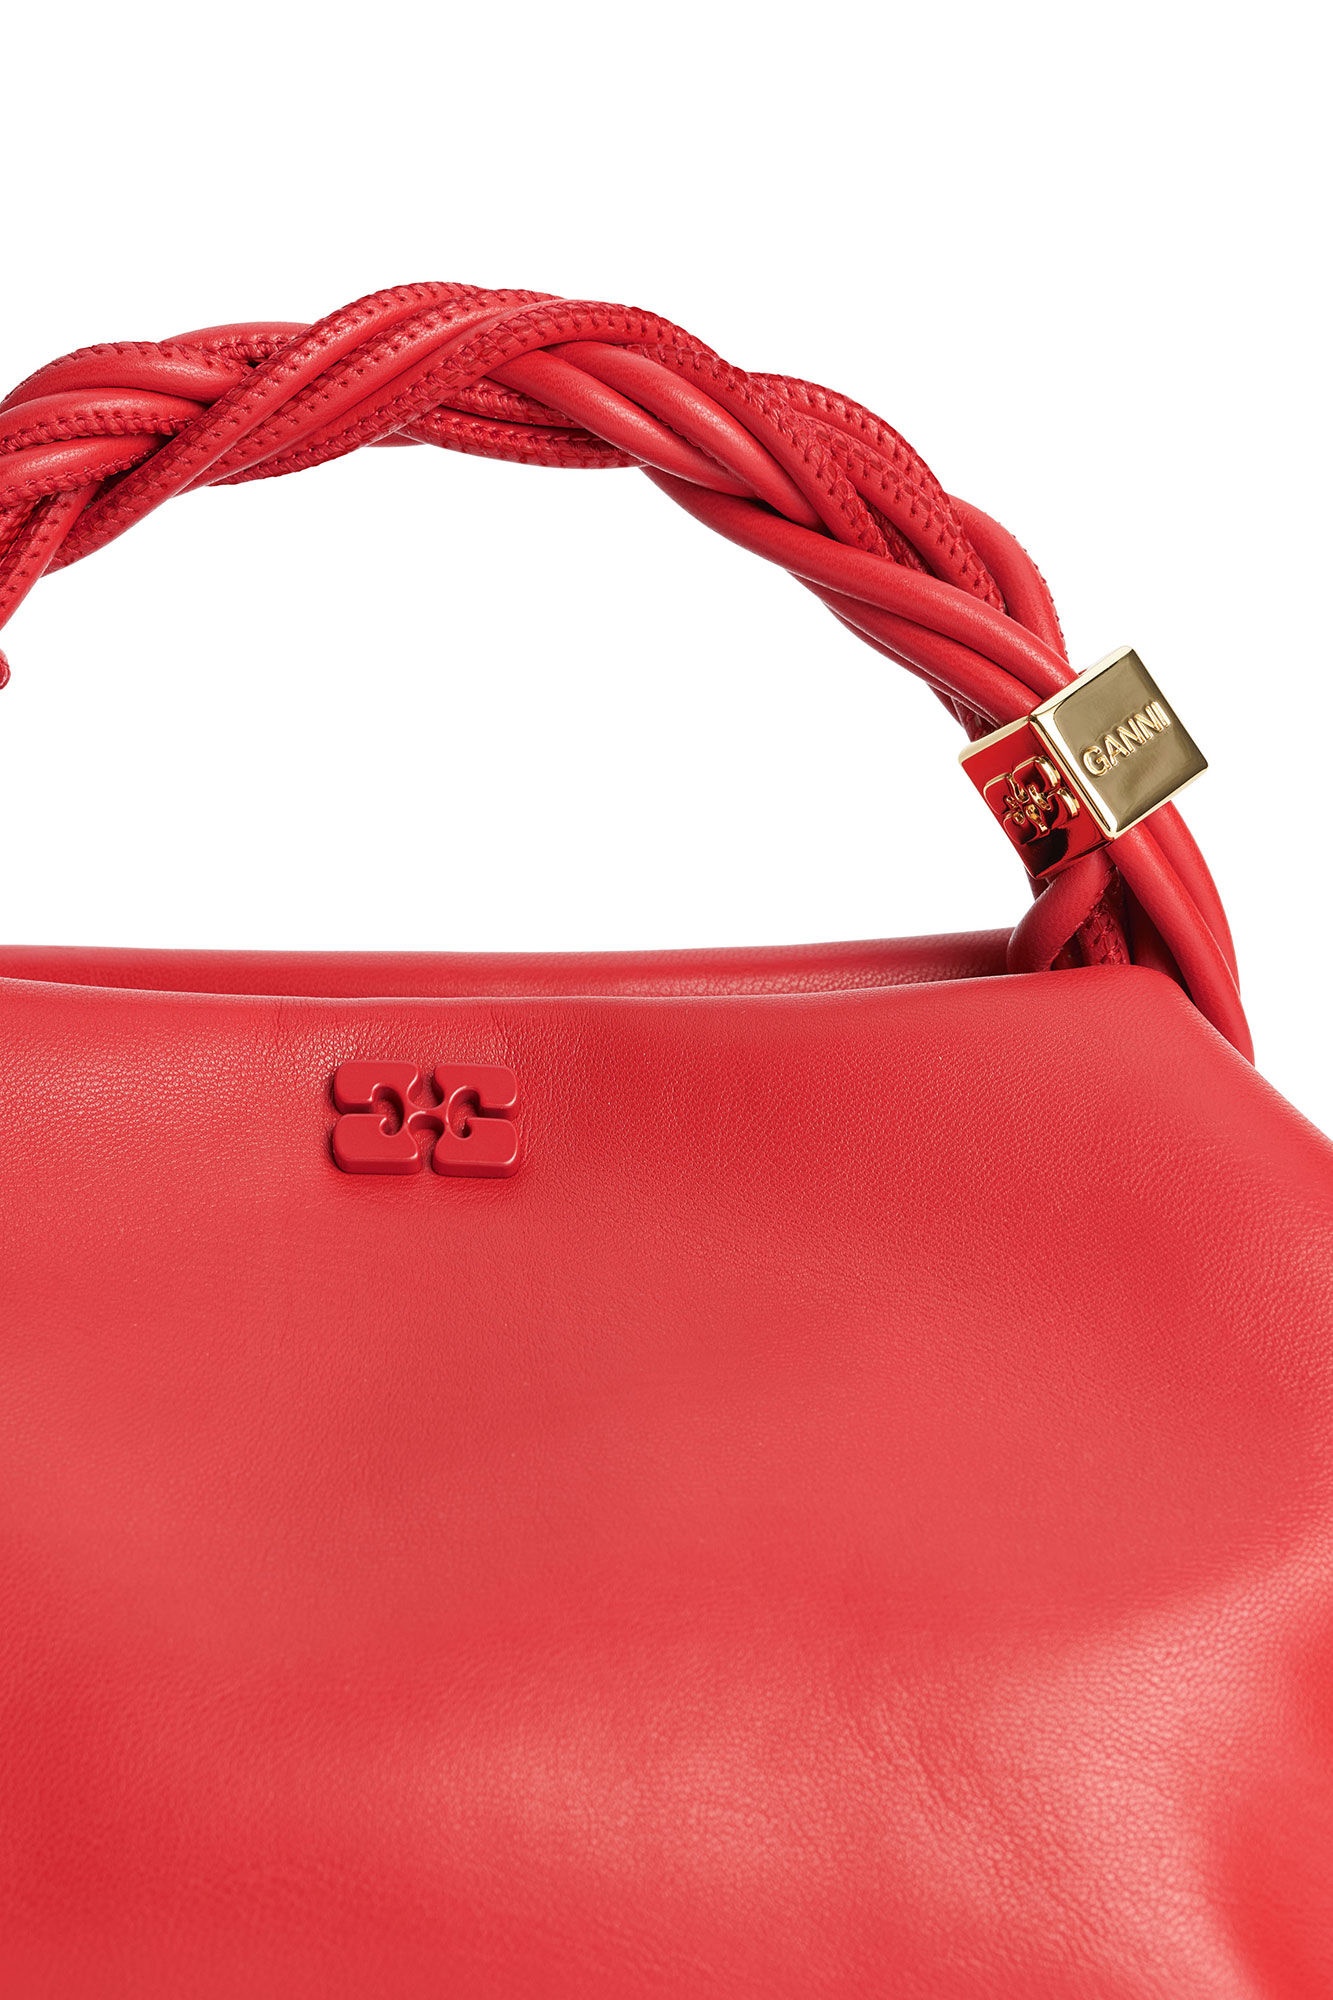 RED SMALL GANNI BOU BAG - 4